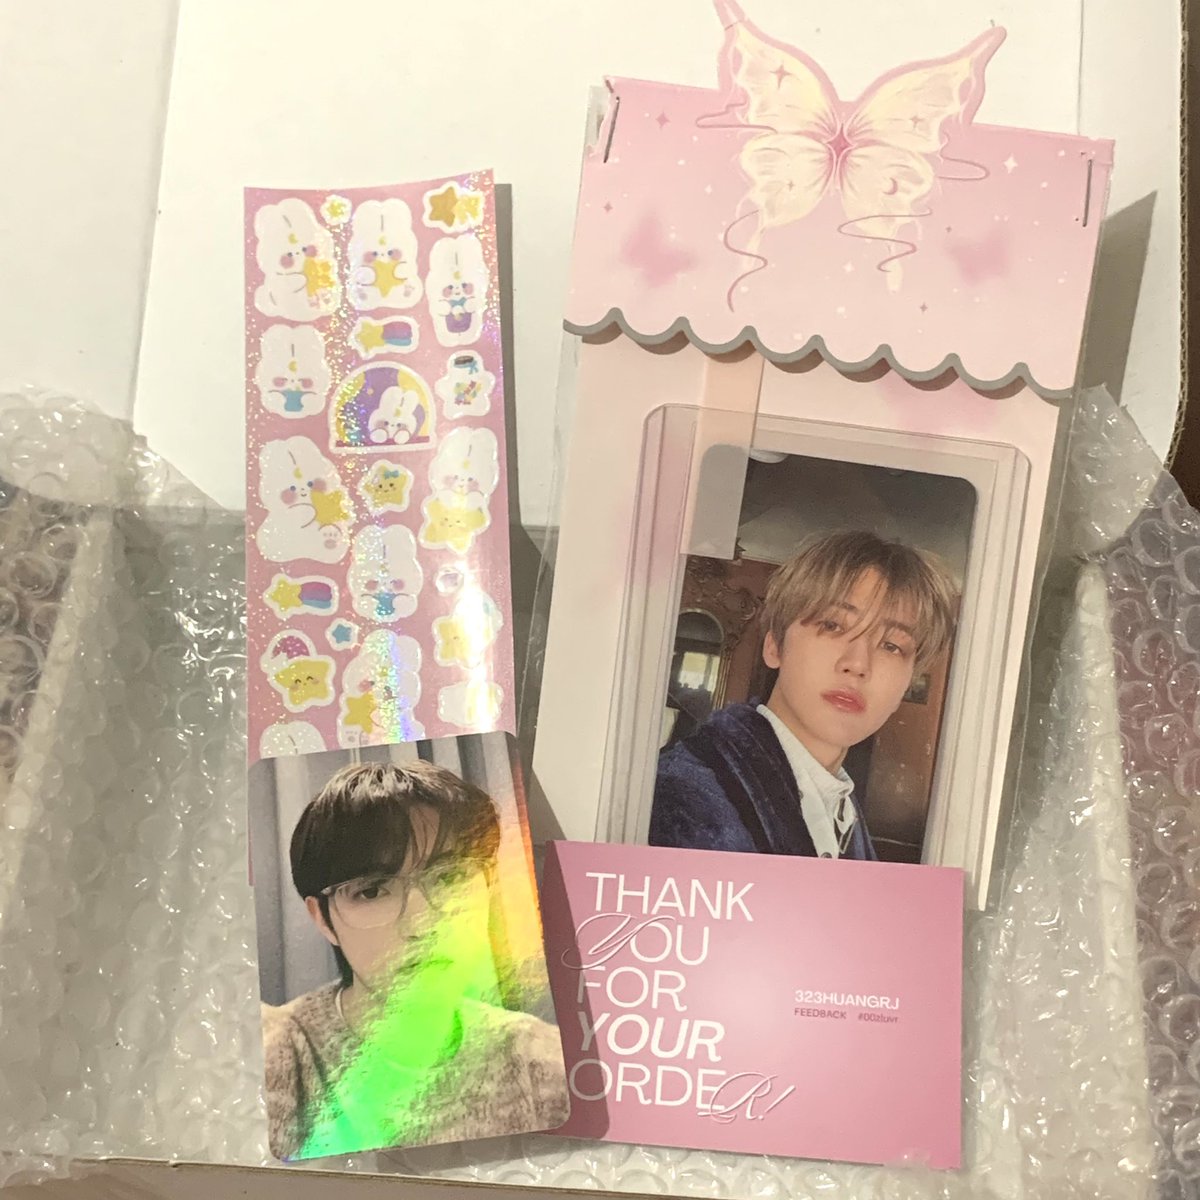 — #00zluvr 🌟

hi! my jaemin pc finally arrived! thank u for packing it super safely and for the fast transaction <3 @323HUANGRJ